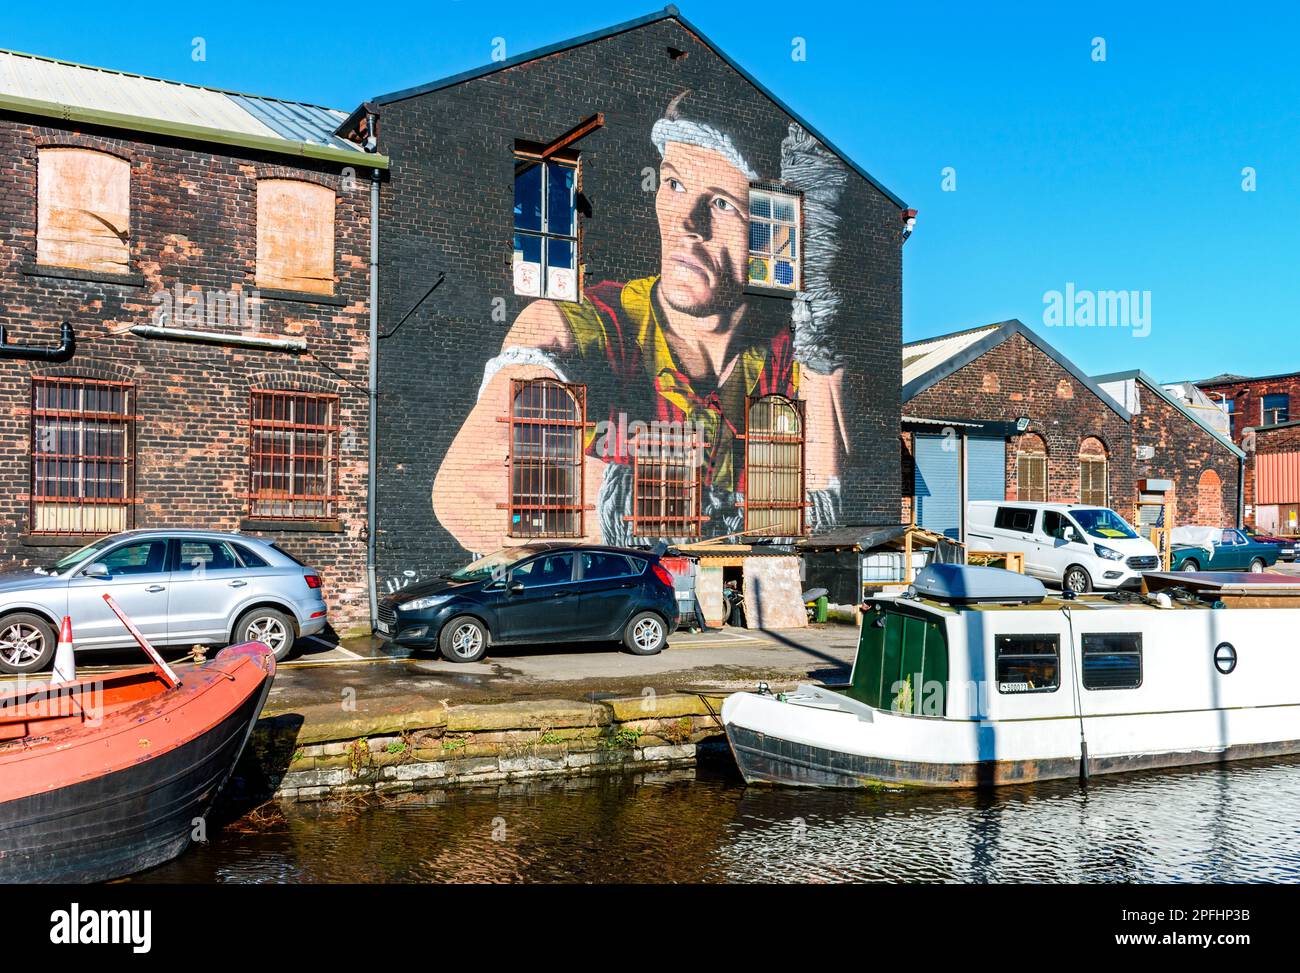 Mural by Akse P19, of Kru Steven Moore from the Sitsiam Camp martial arts centre.  By the  Huddersfield Narrow Canal., Ashton-under-Lyne, Tameside, UK Stock Photo